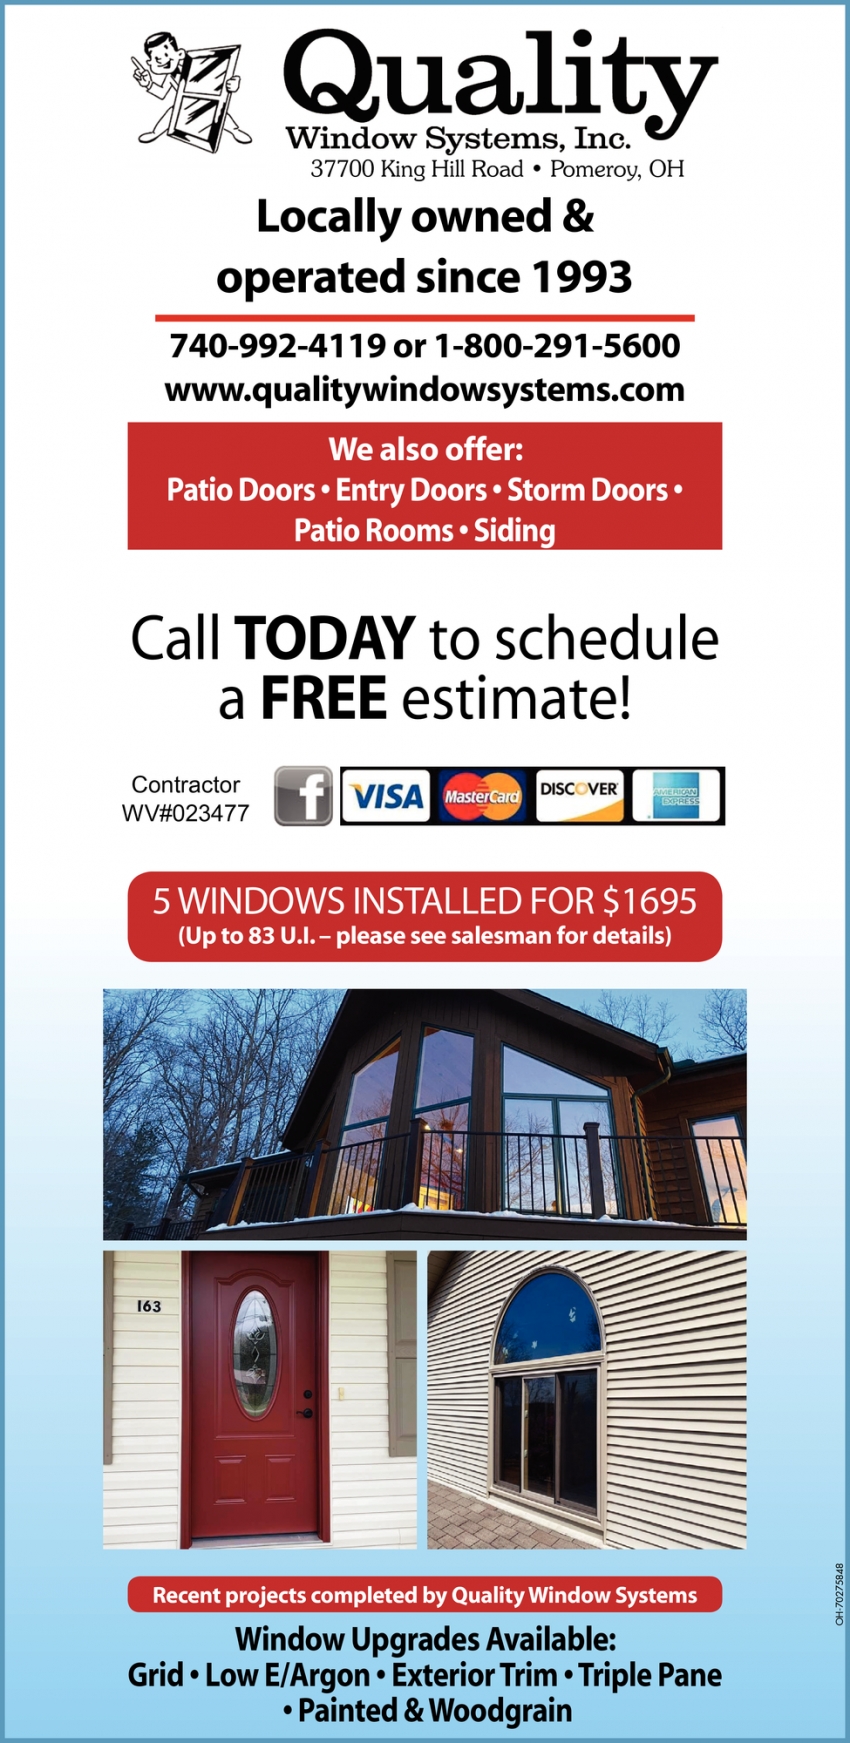 5 Windows Installed for $1695